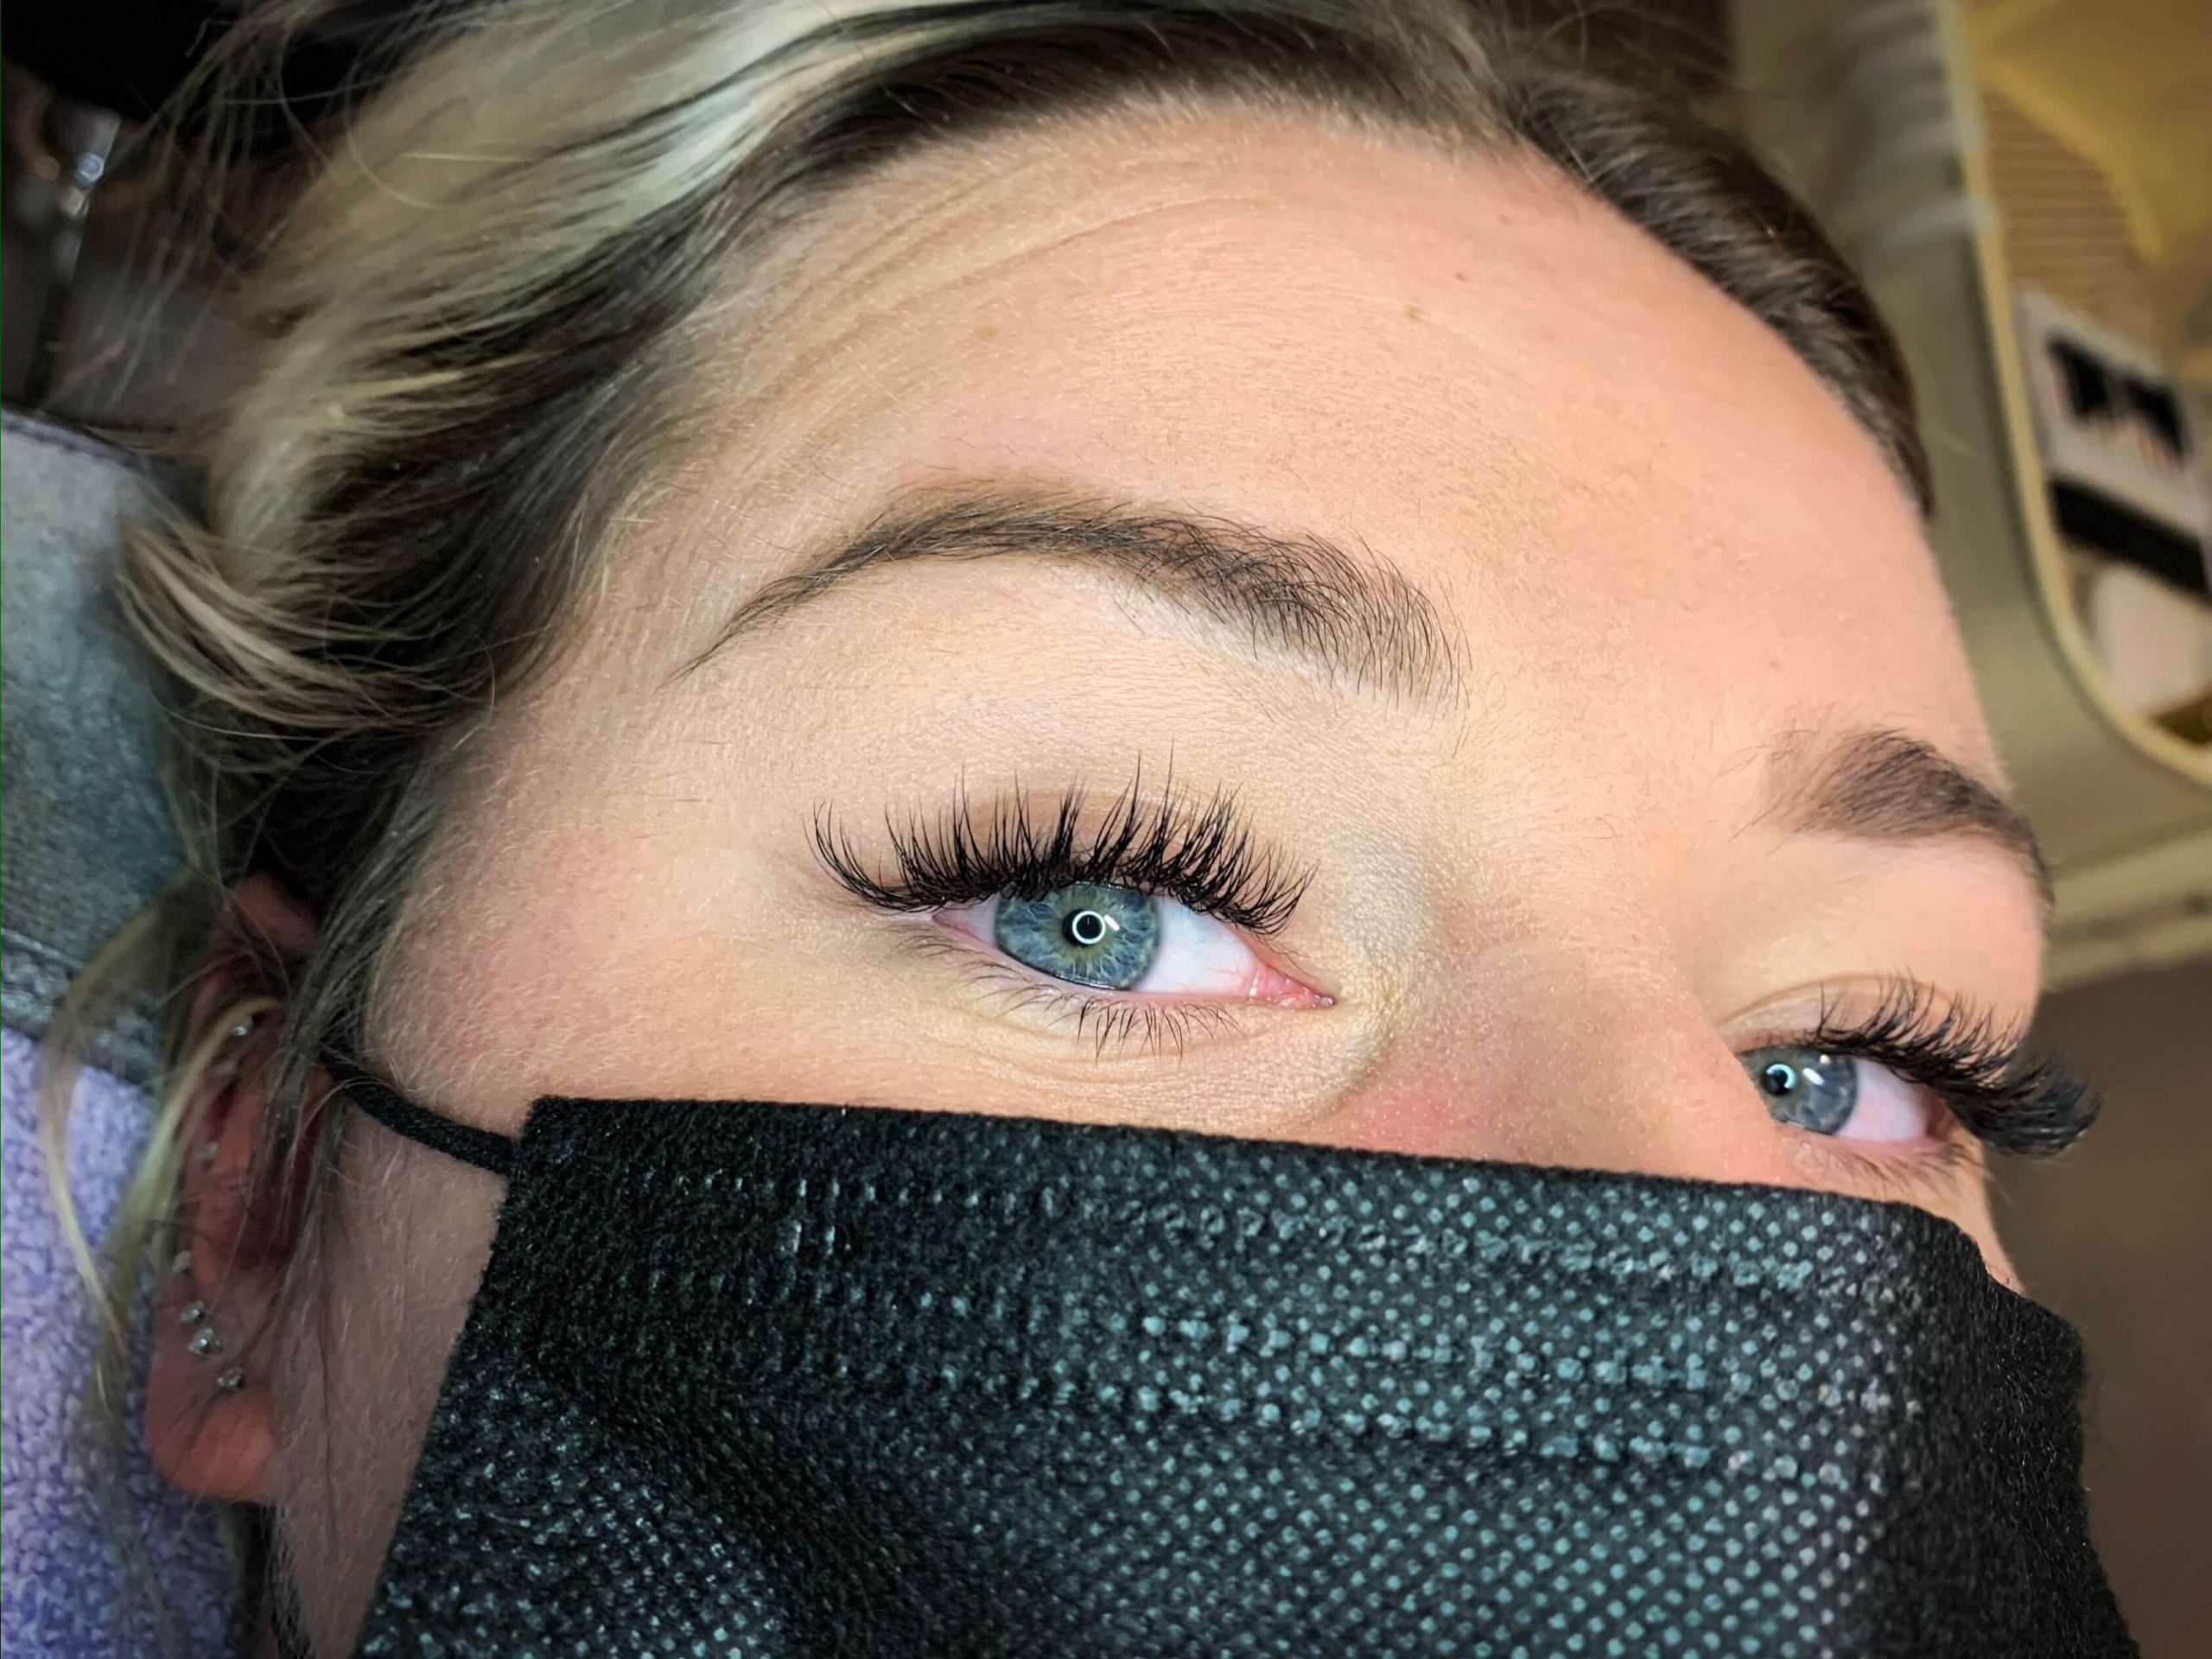 Woman's eyelashes before and after eyelash extension.